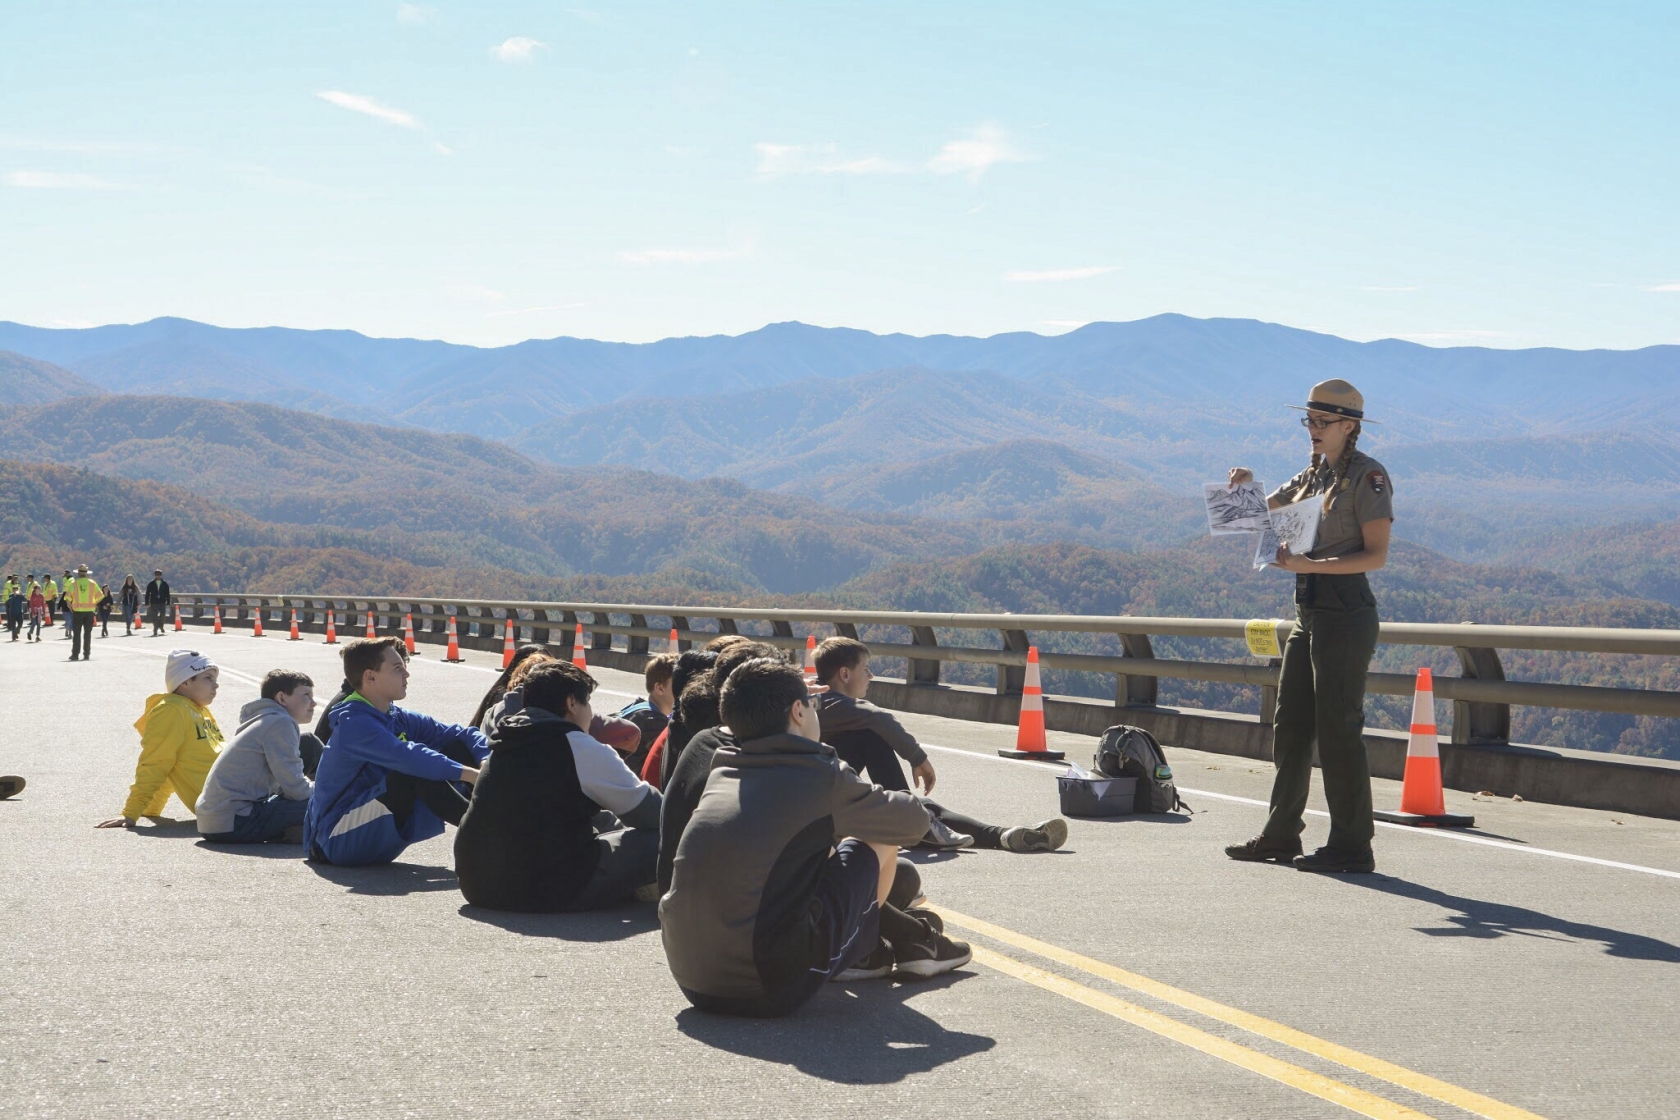 On a paved road, blocked off to traffic, Jessie Snow, in full NPS uniform, holds up a couple of papers to give a demonstration to a group of students sitting on the road in front of her. In the background, a scenic vista of the Great Smokies